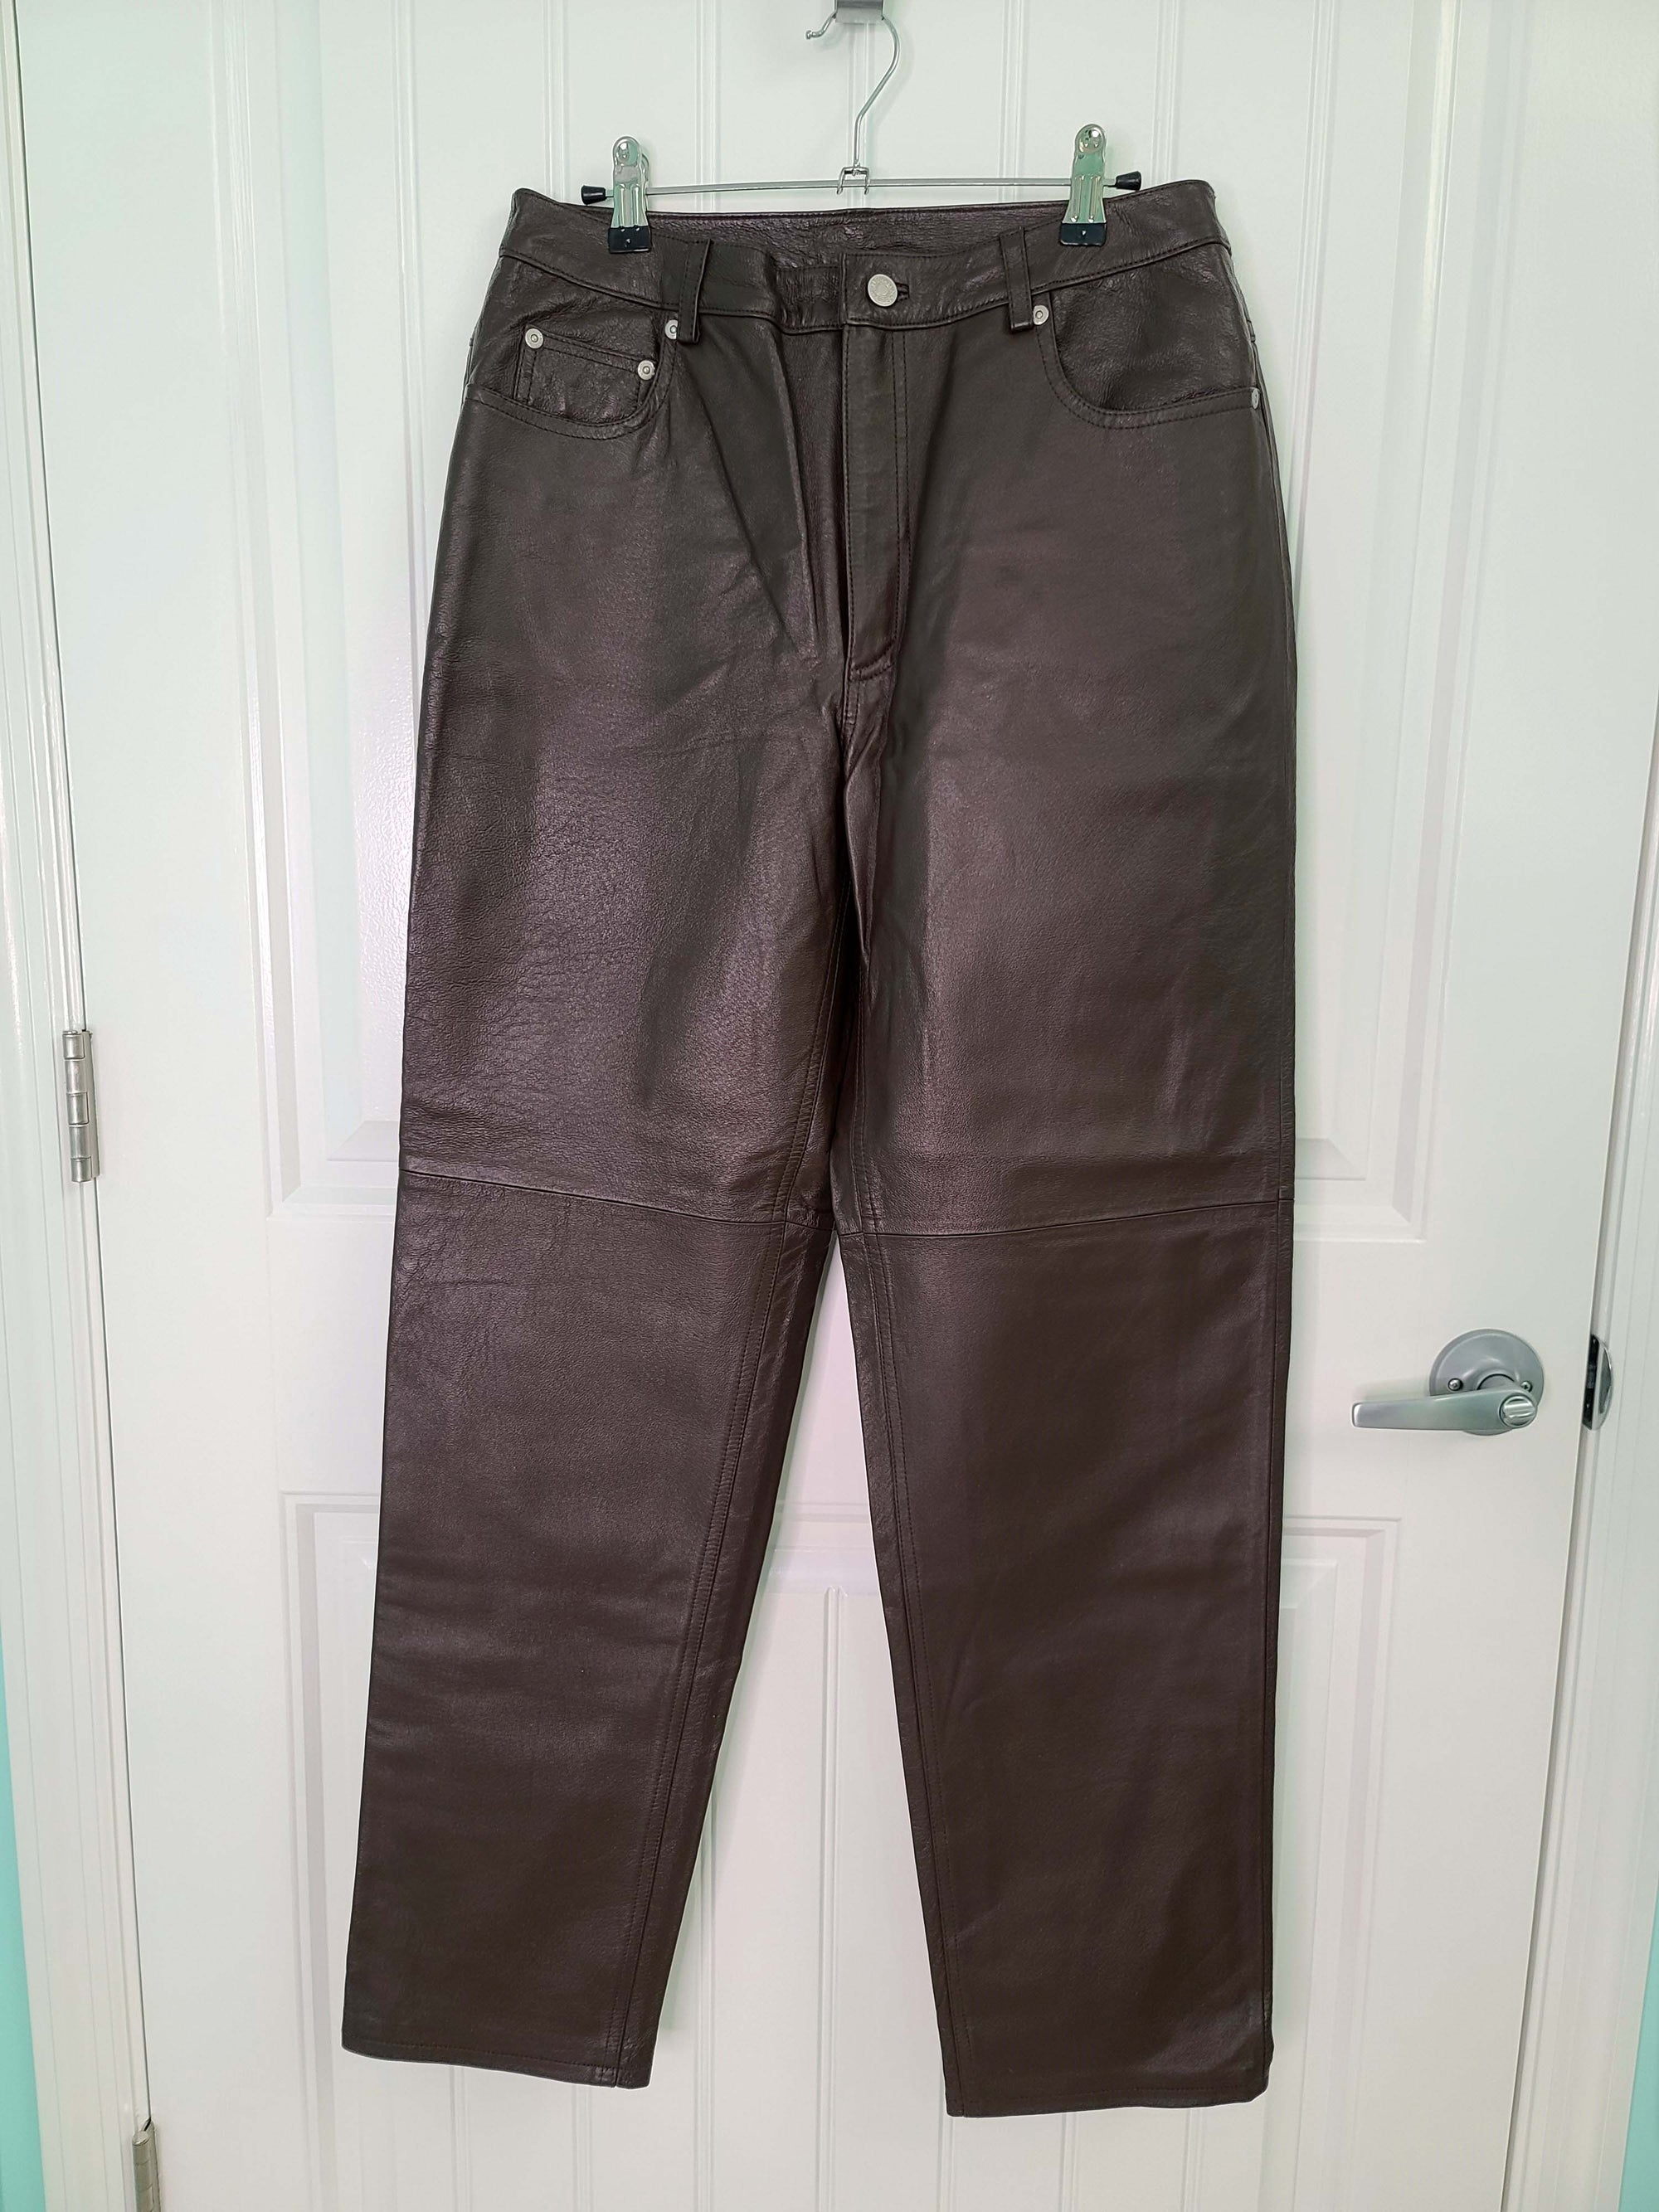 Brown Newport News Leather Jeans (12)